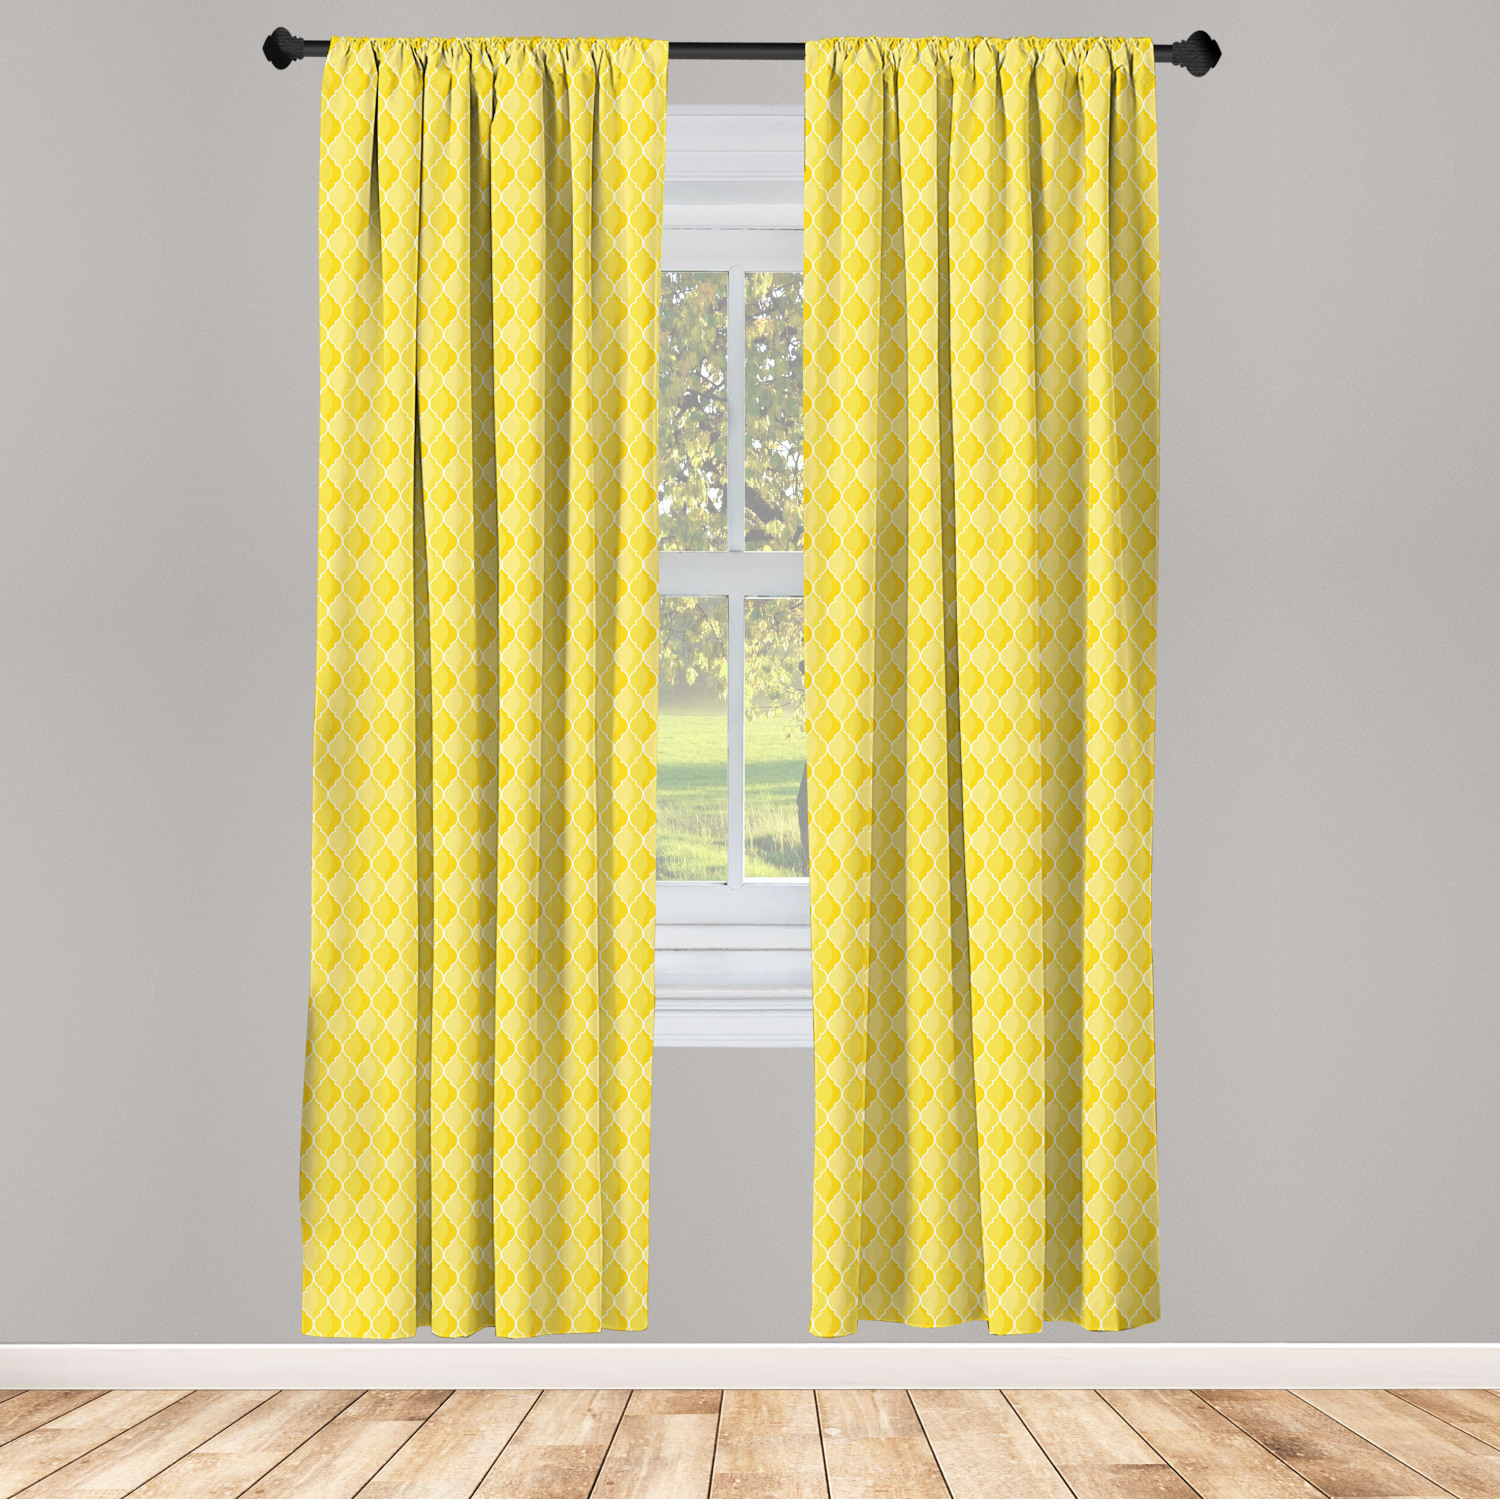 Yellow Microfiber Curtains 2 Panel Set For Living Room Bedroom In 3 Sizes Ebay